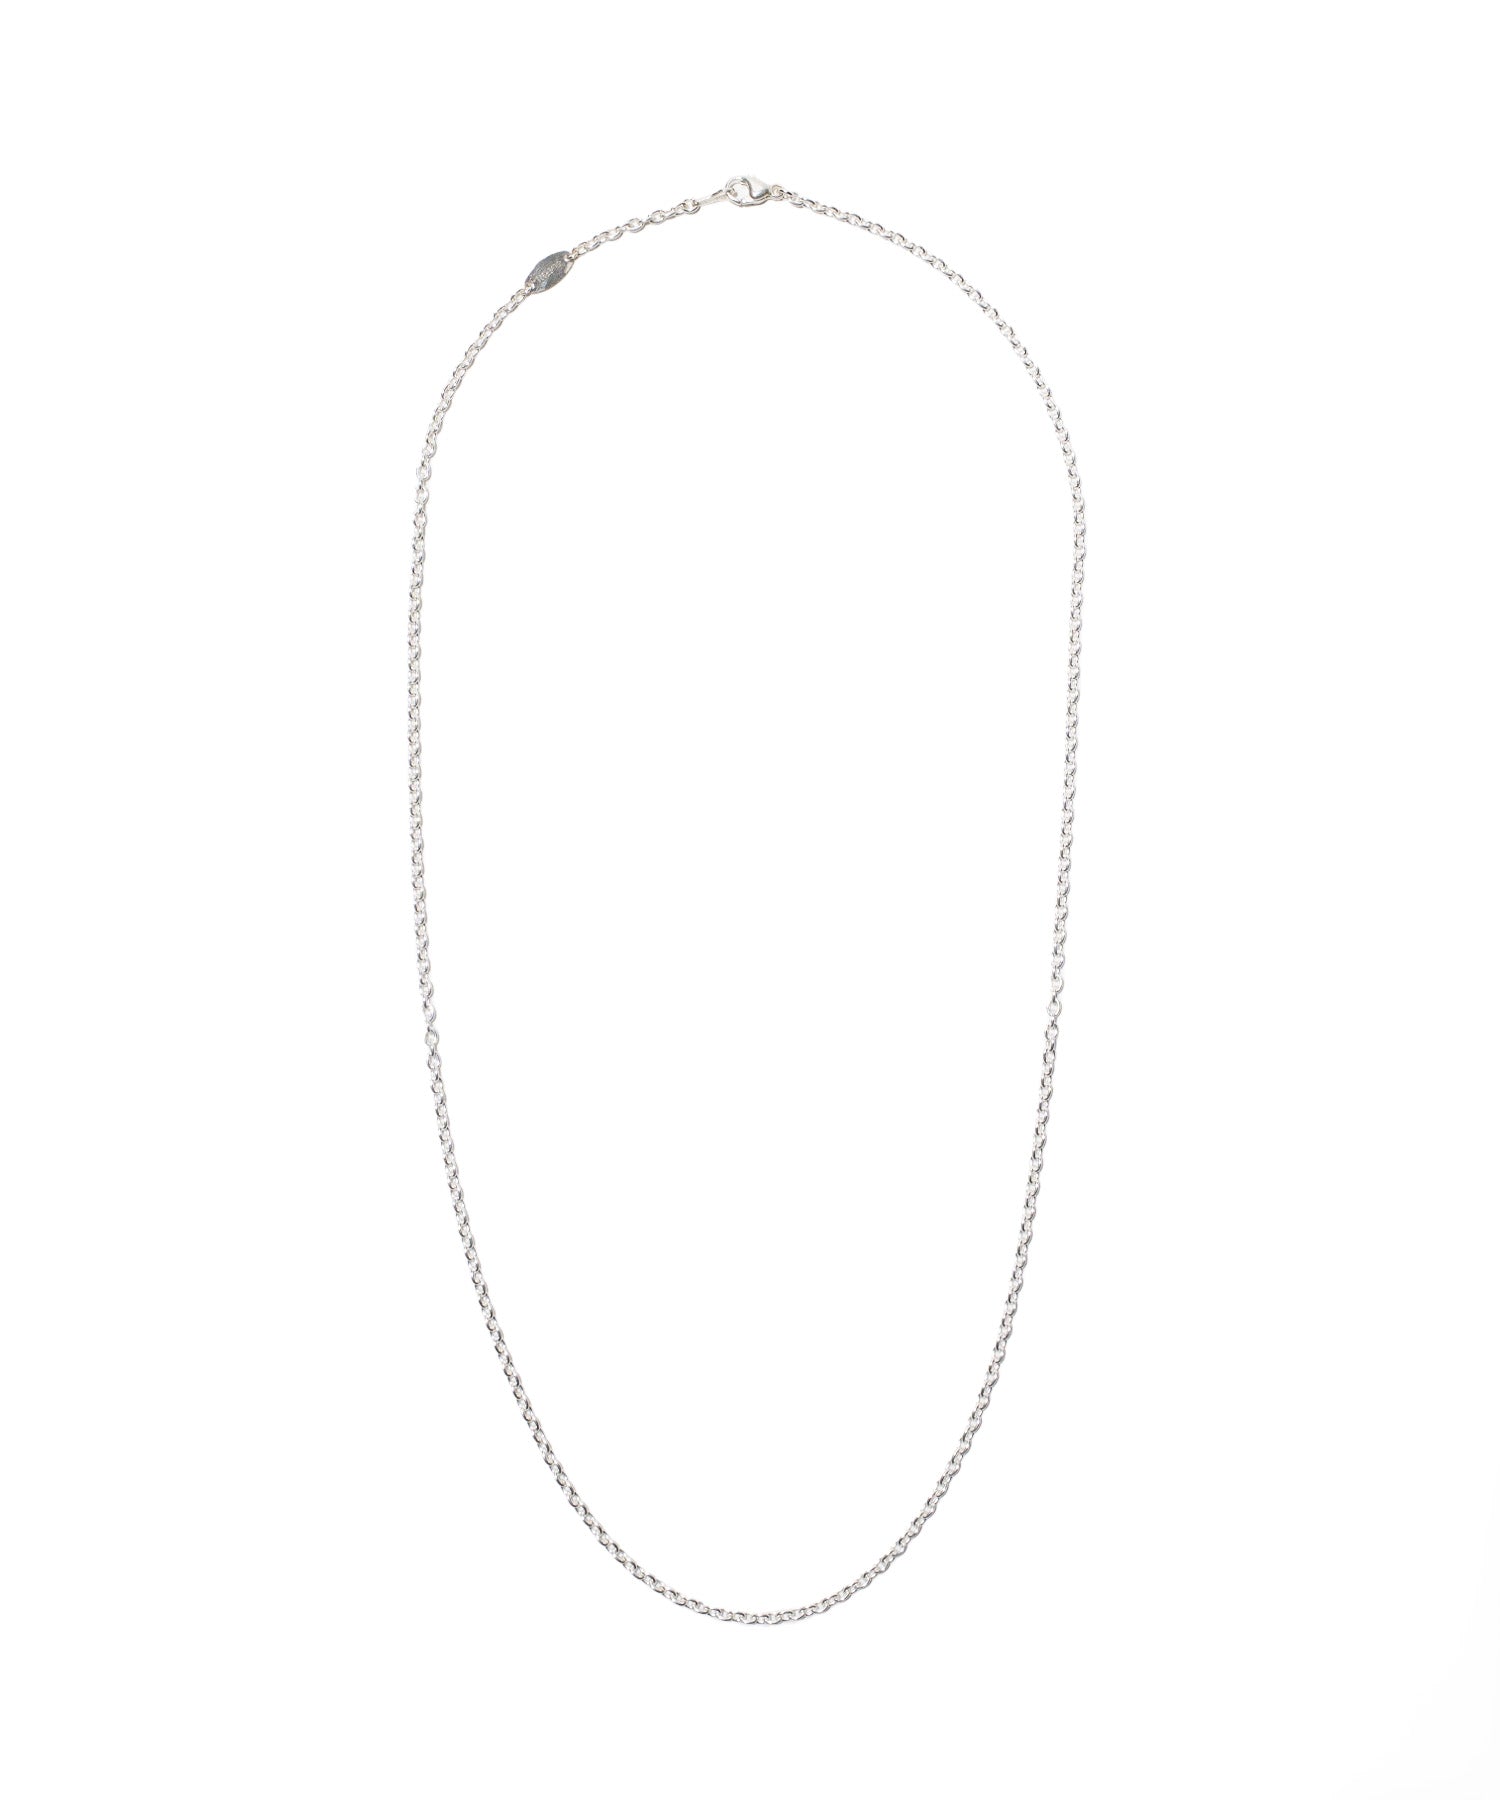 【5/10 12:00- IN STOCK】CHAIN NECKLACE